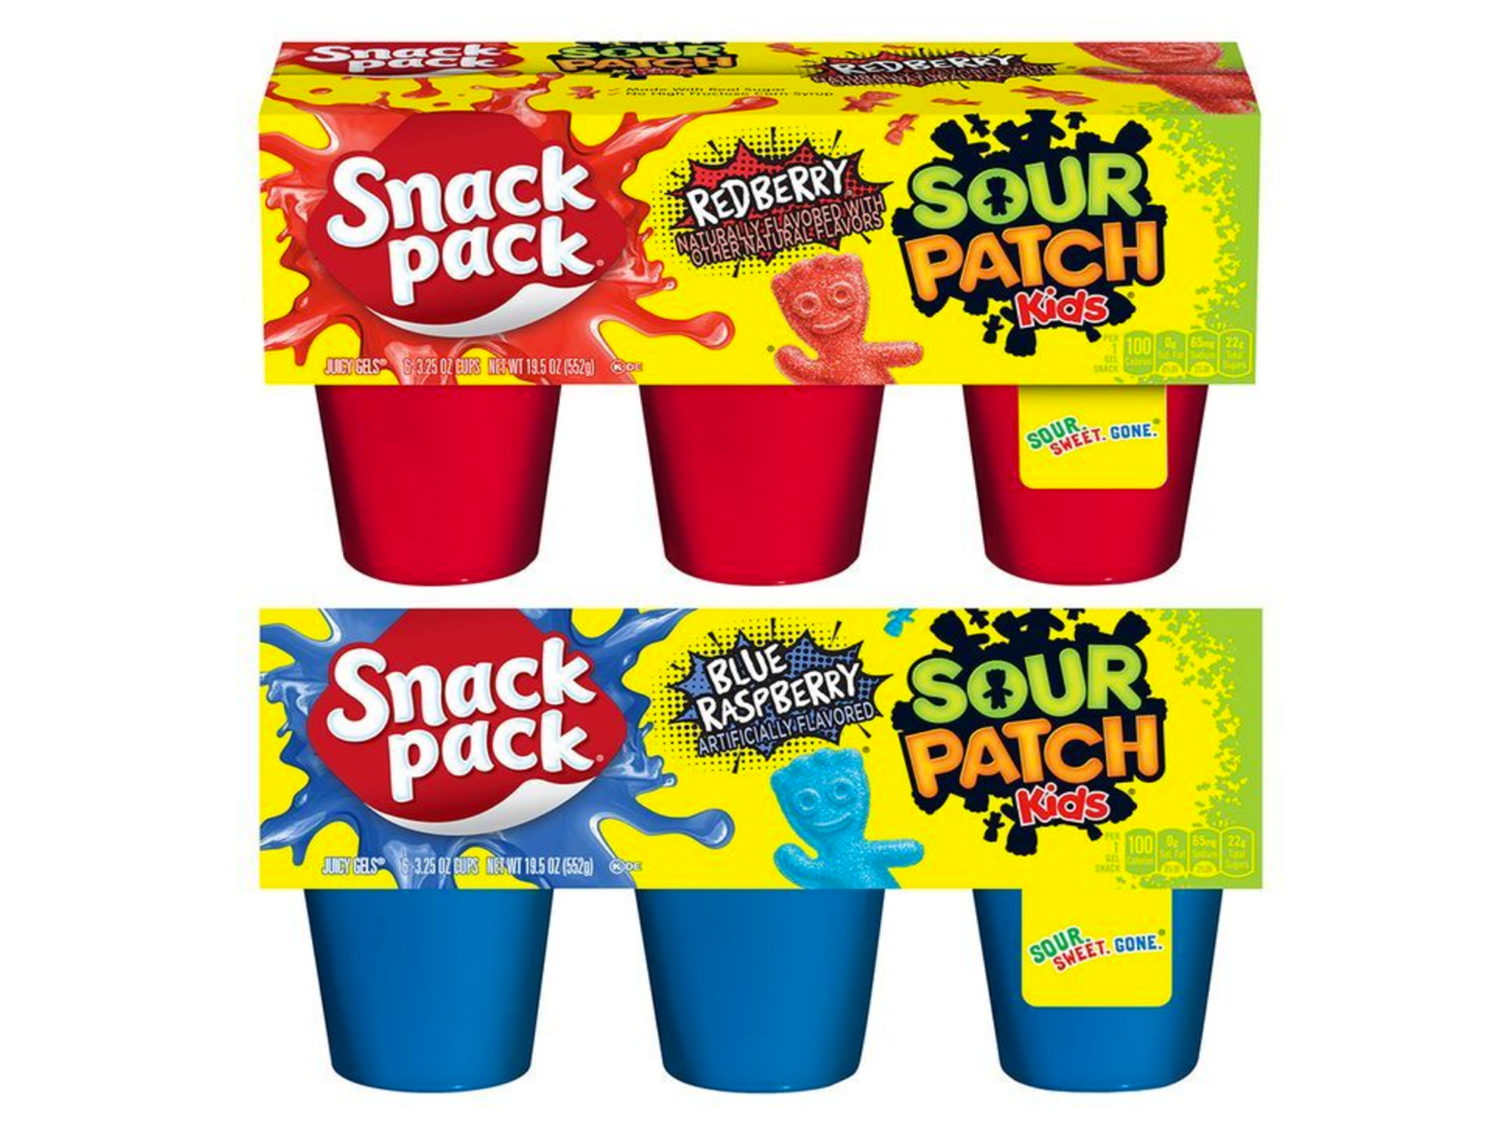 snack pack sour patch gelatin